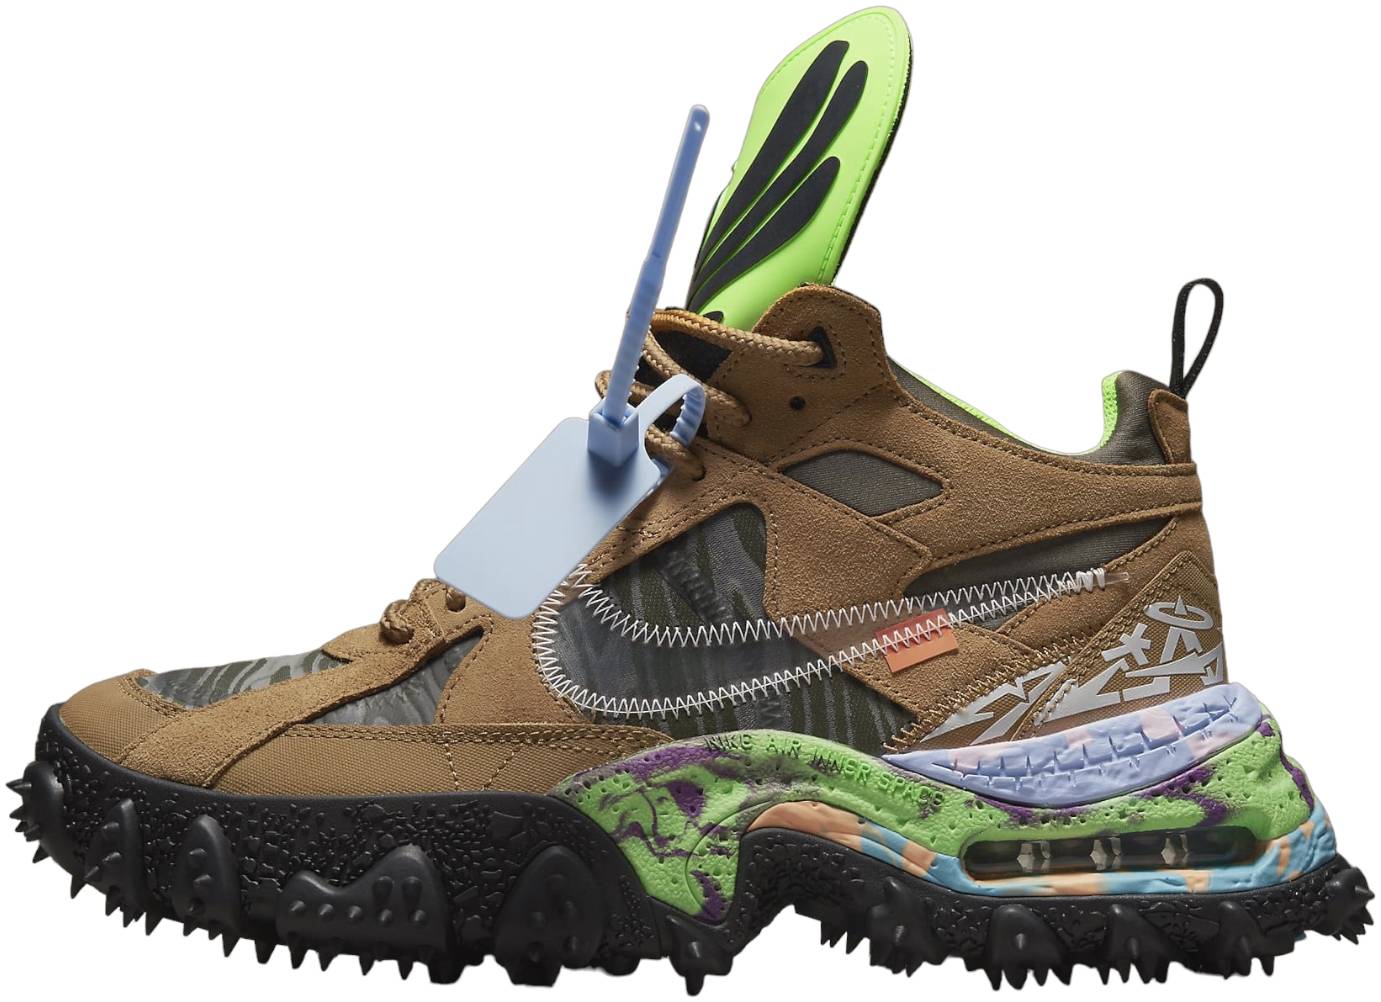 brugerdefinerede Beliggenhed Ray Nike Air Terra Forma x Off-White Review, Facts, Comparison | RunRepeat